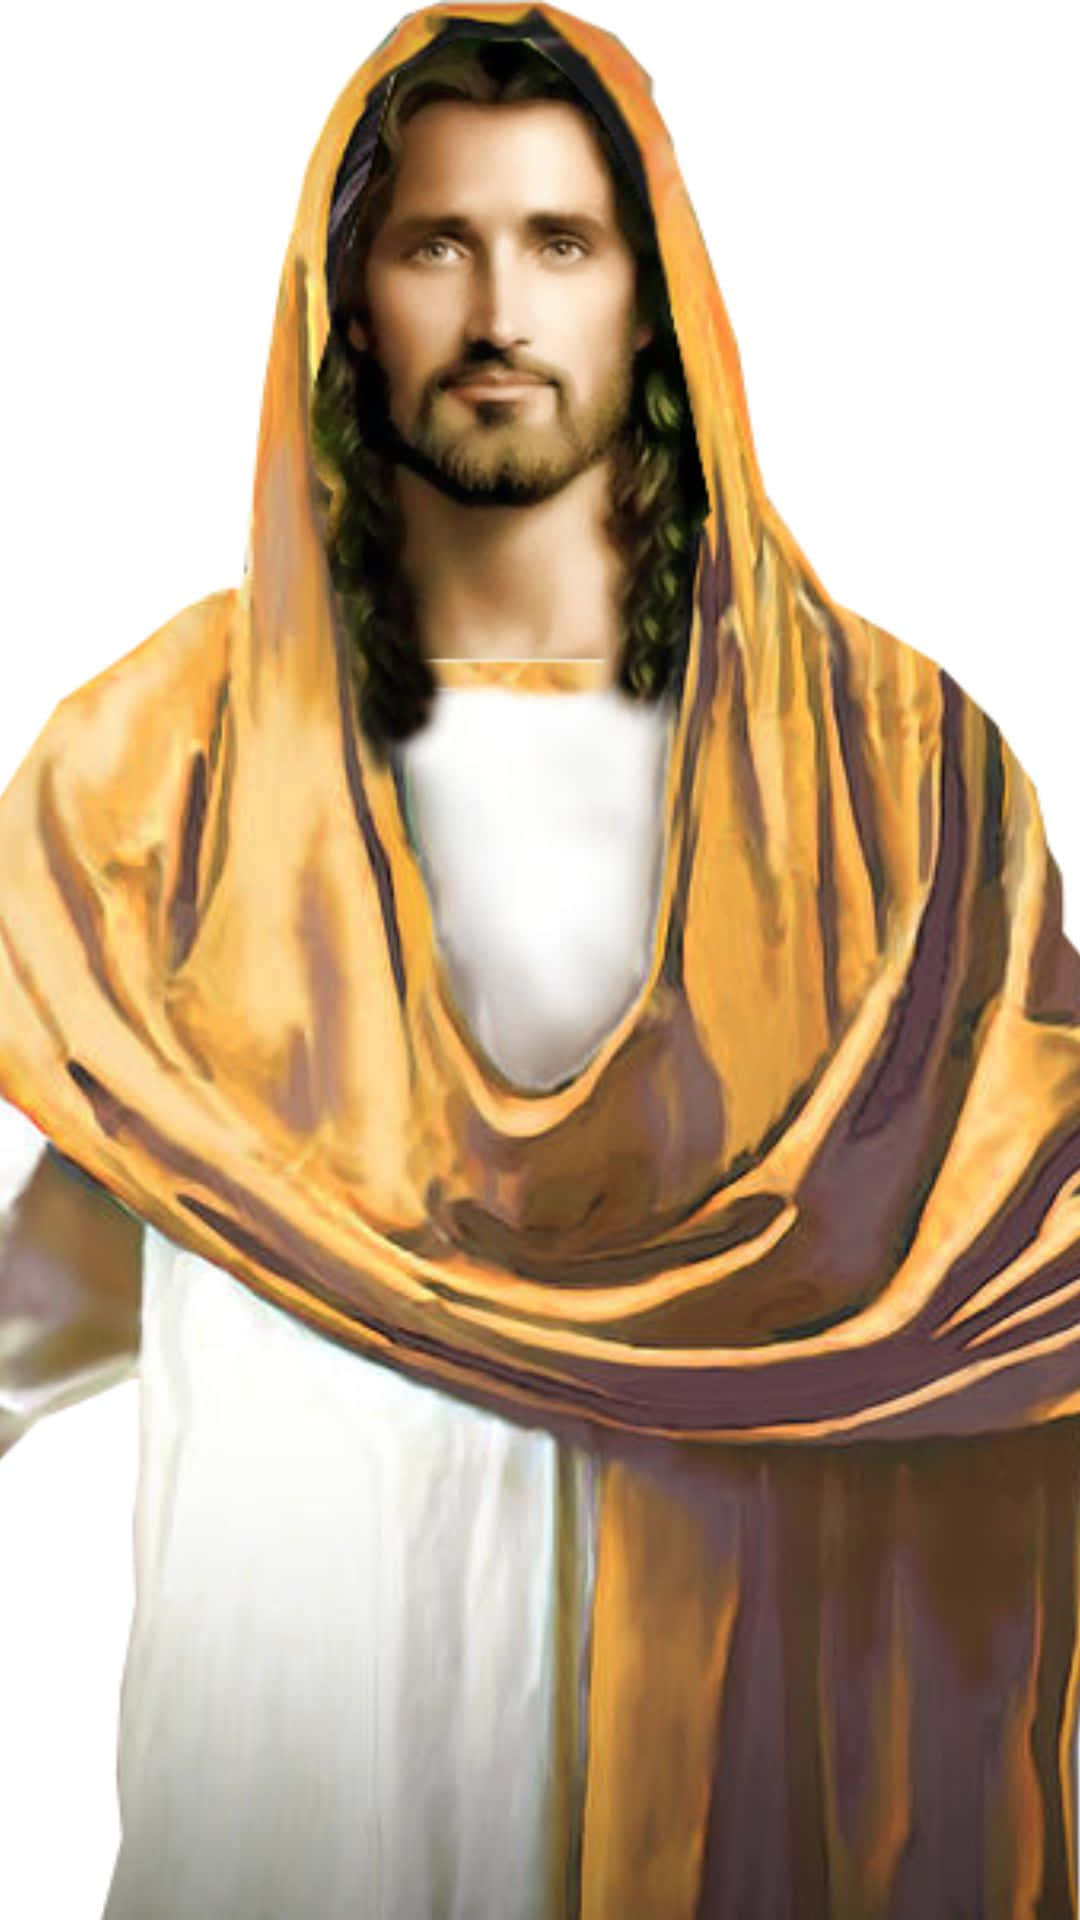 Picture of Jesus Christ from the Latter-day Saints faith Wallpaper